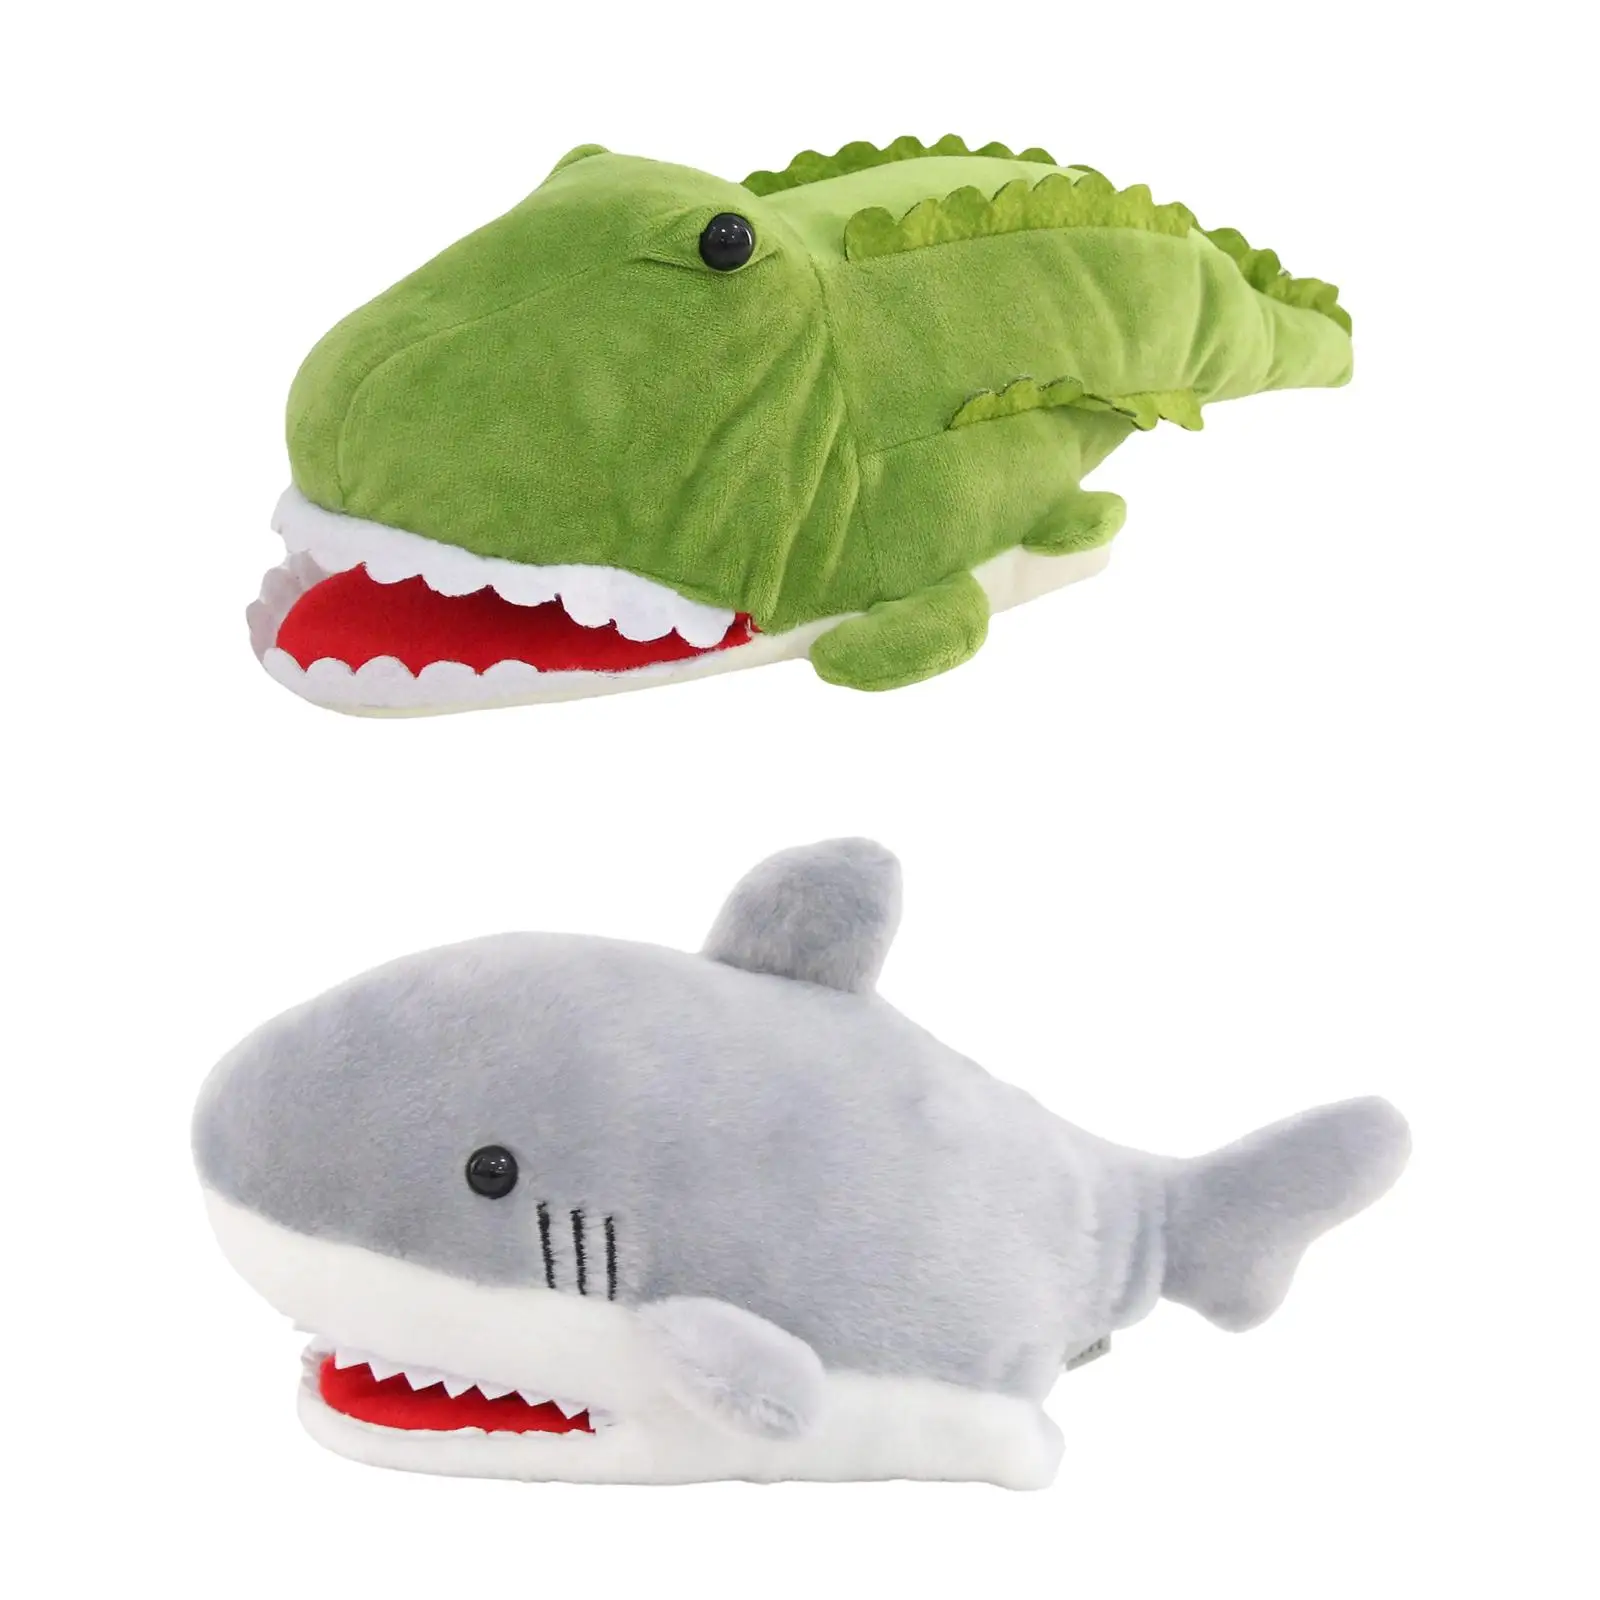 Animal Hand Puppets Kids Gifts Developing Intelligence for Imaginative